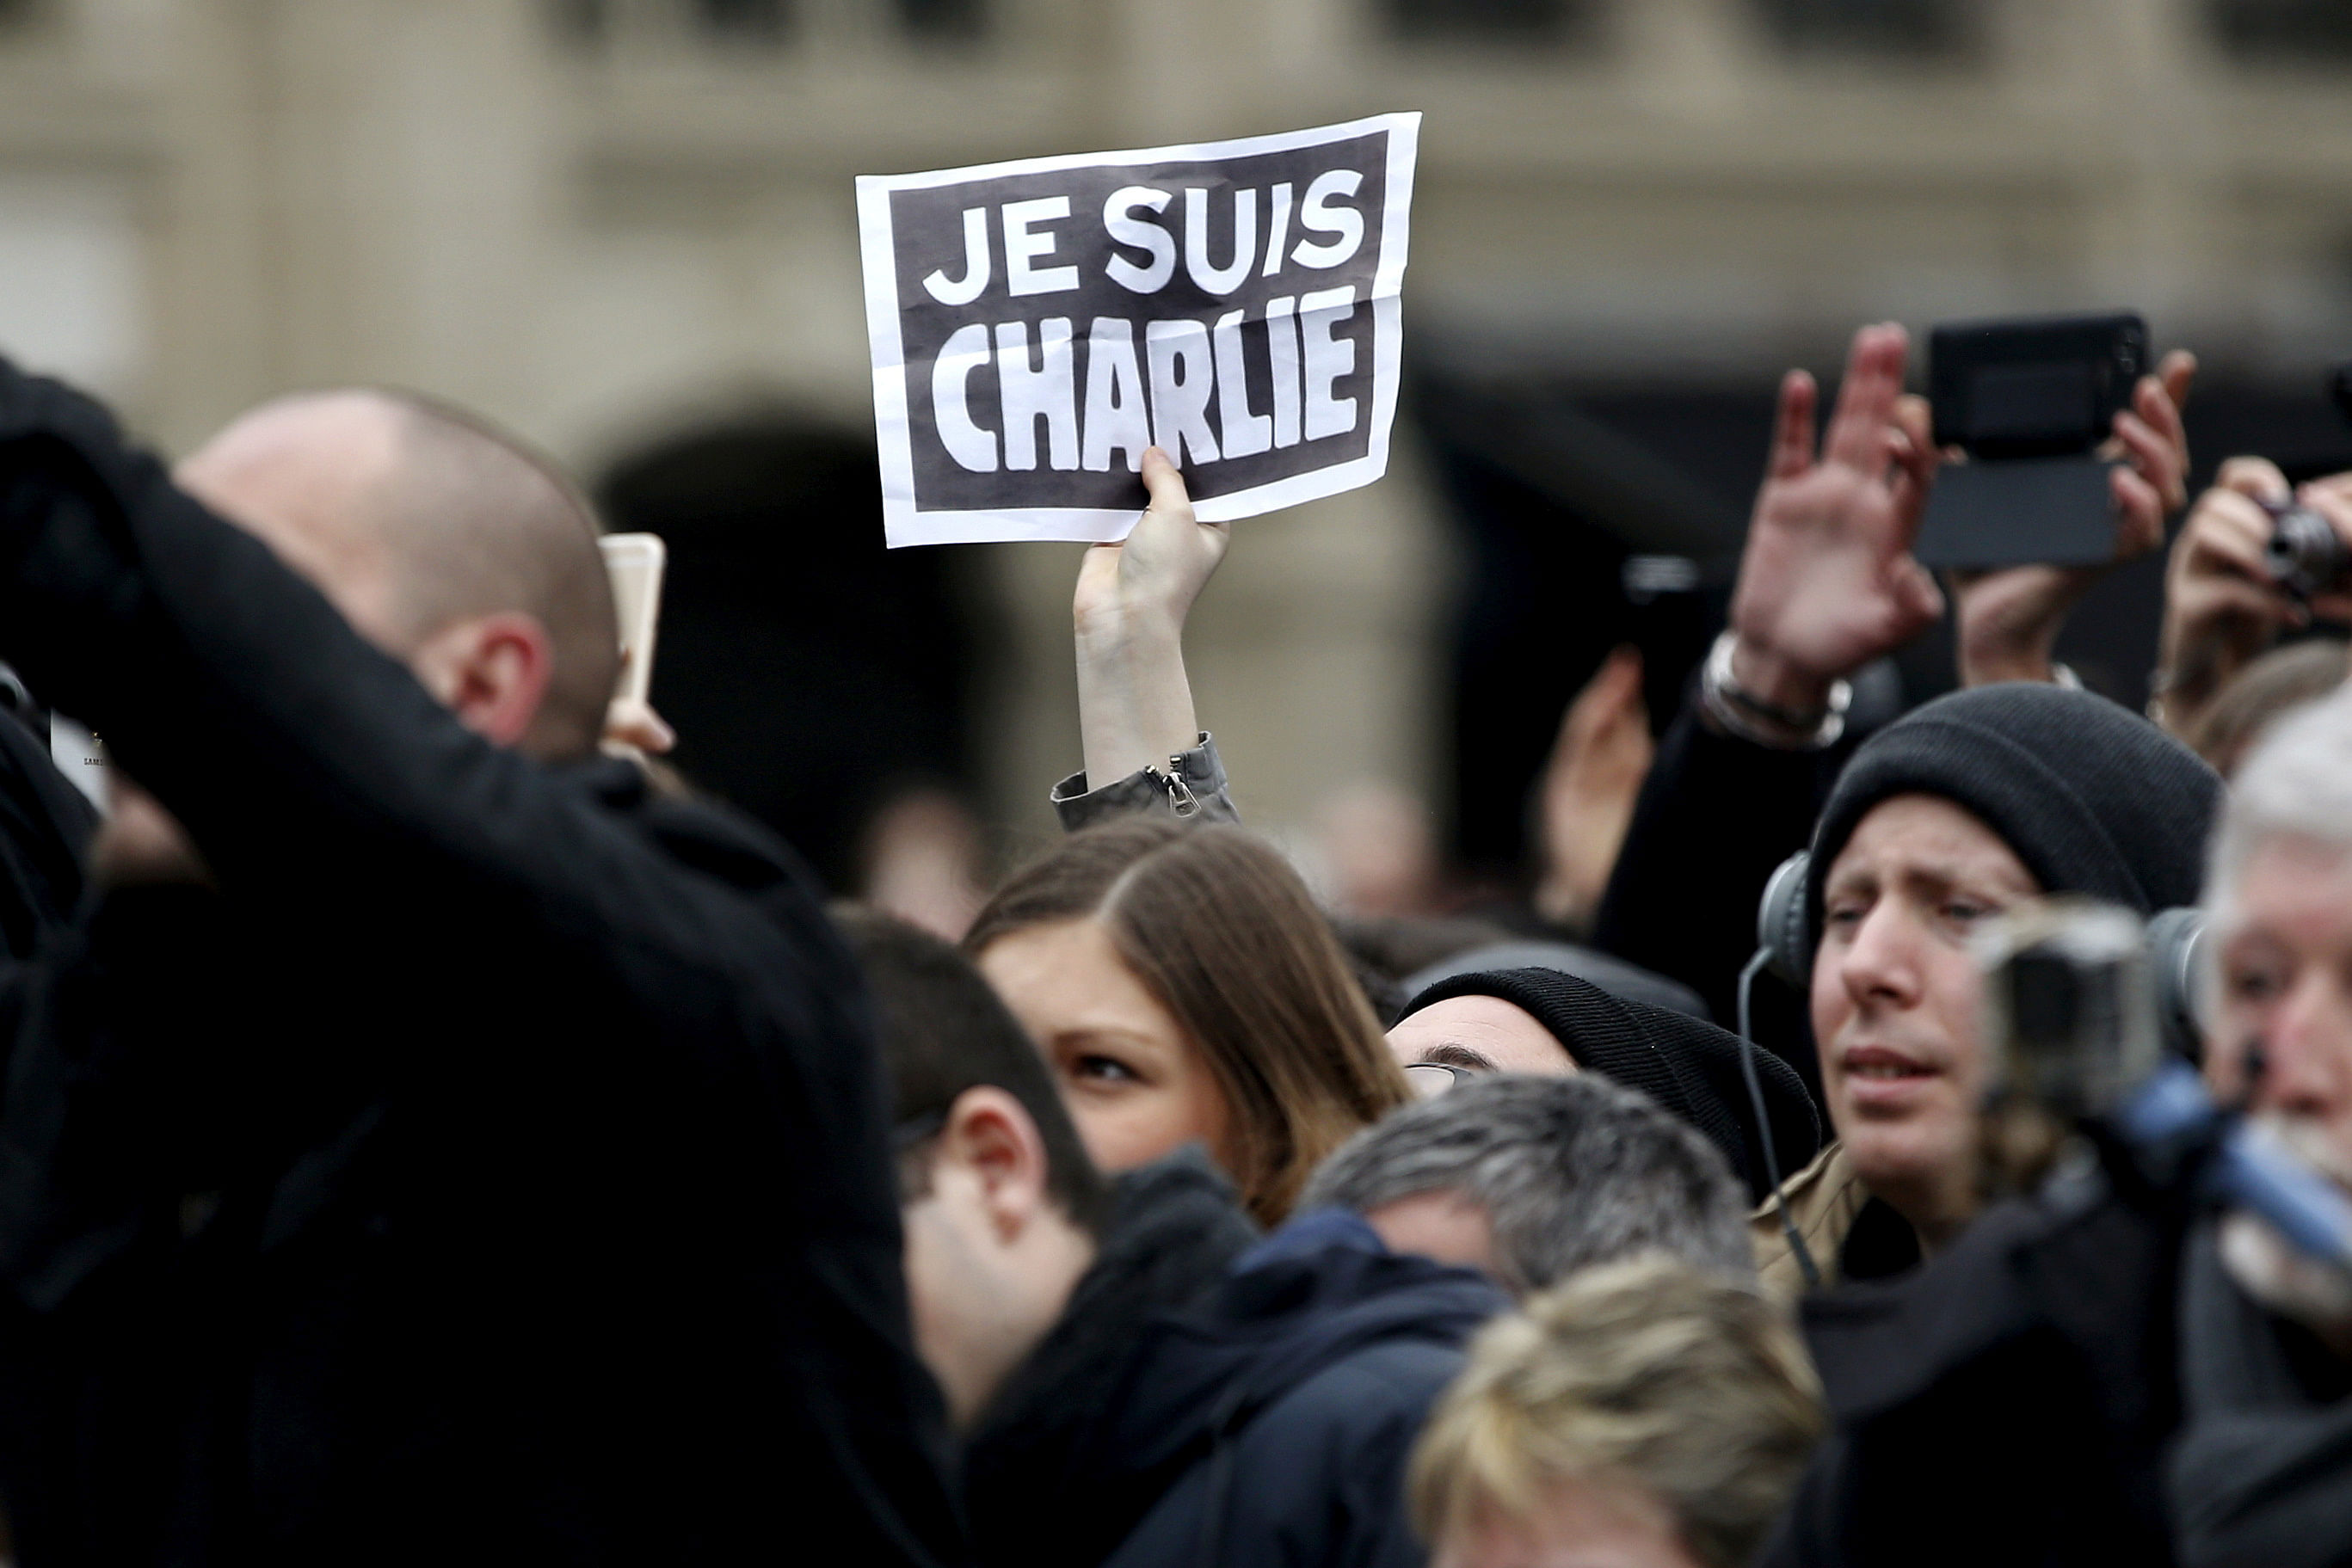 A person holds up a "Je Suis Charlie" (I am Charlie) sign during a ceremony at Place de la Republique to pay tribute to the victims of last year's shooting at the French satirical newspaper Charlie Hebdo. Credit: Reuters